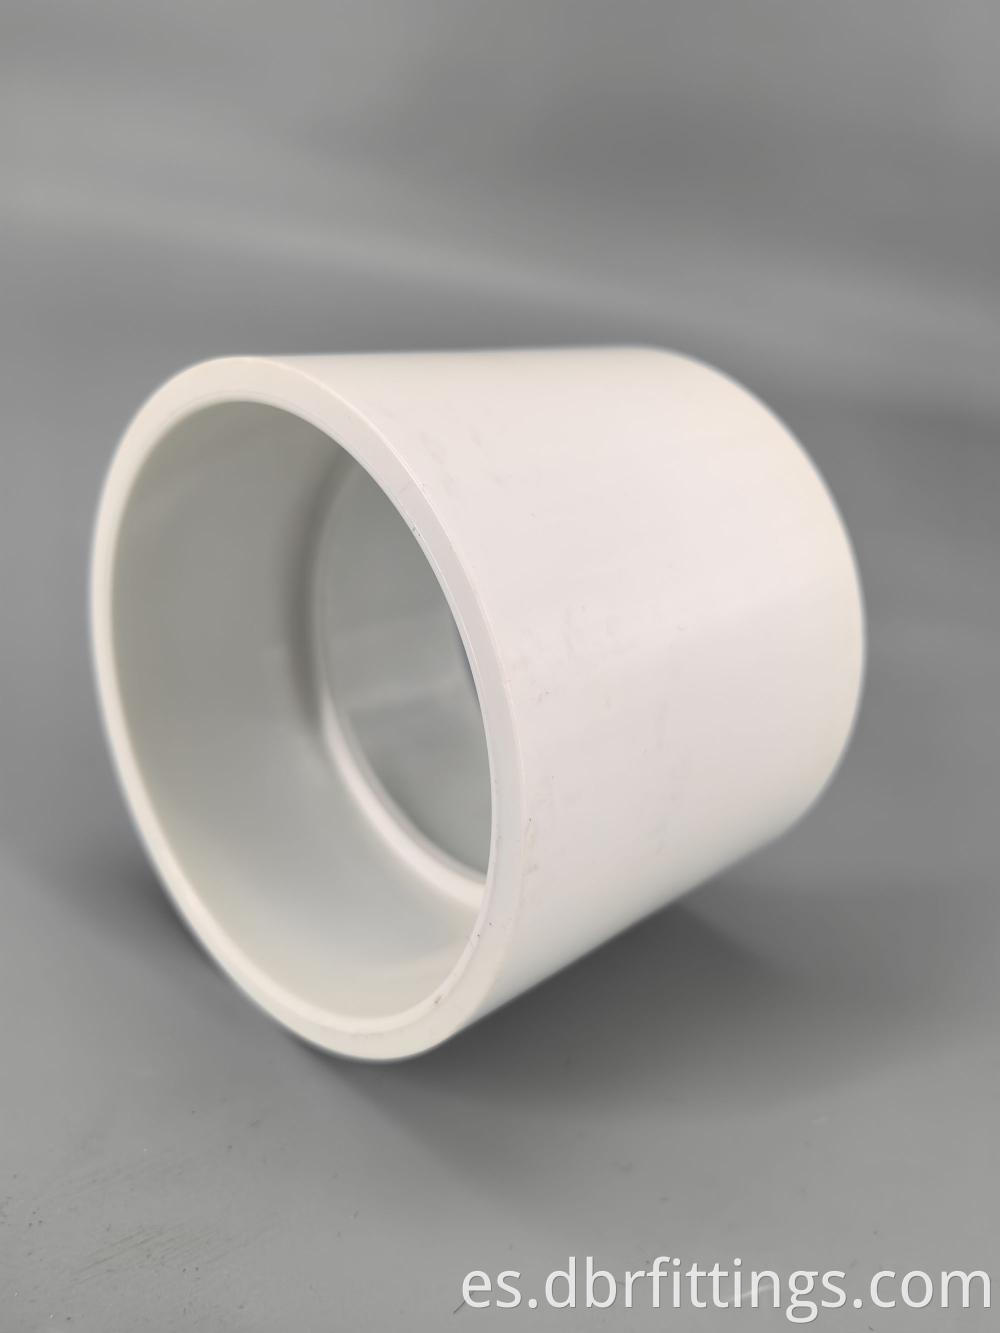 PVC fittings COUPLING for Construction work